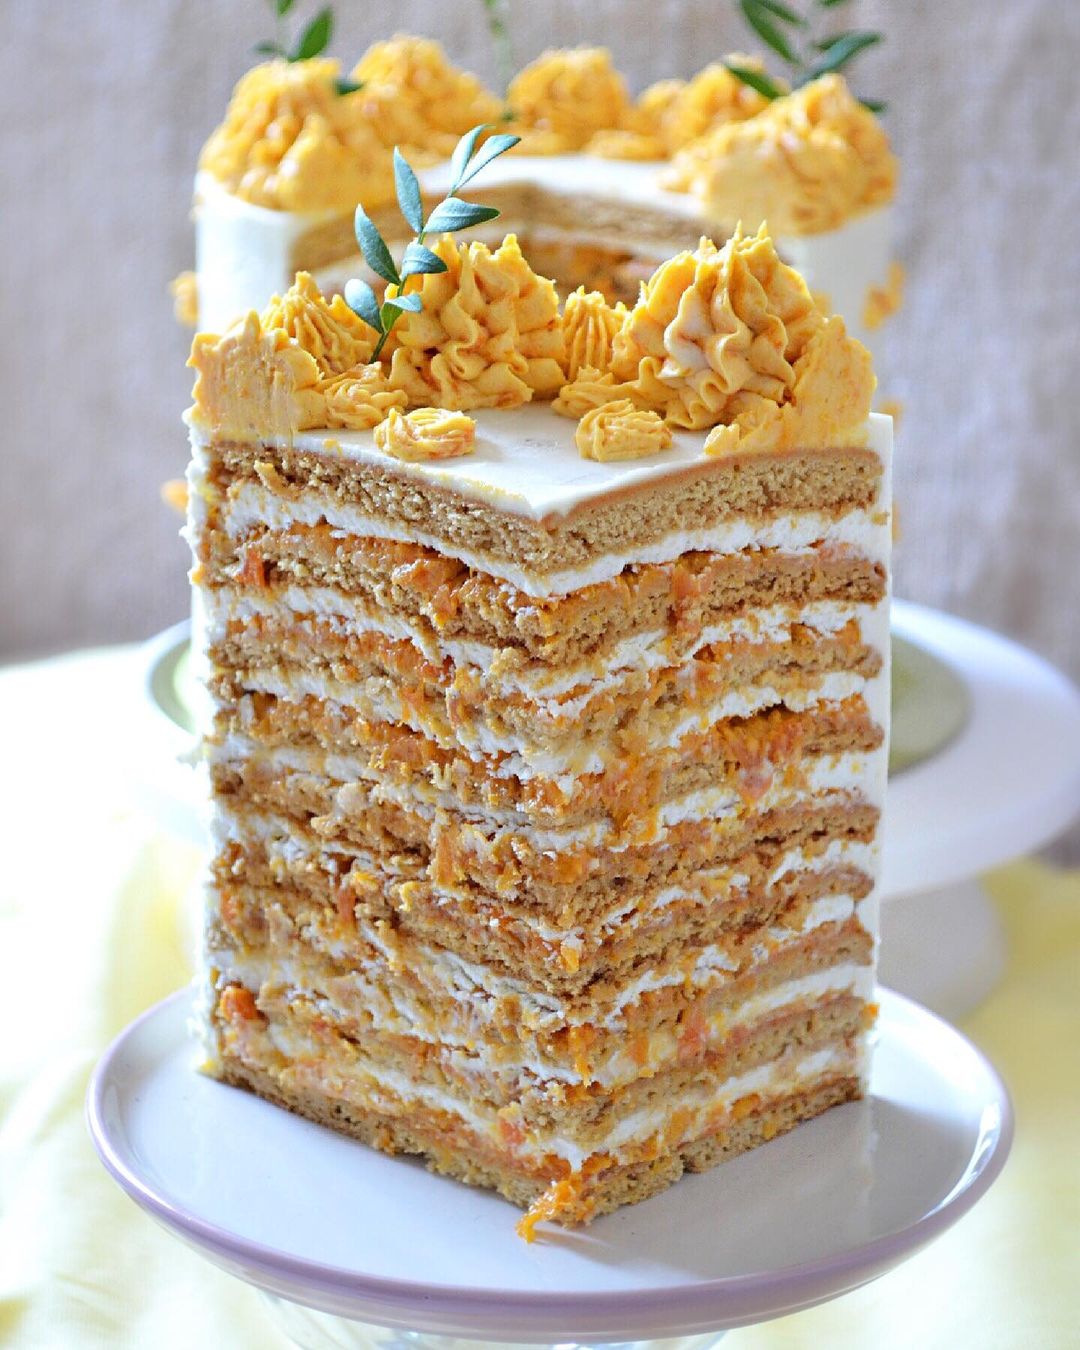 Honey cake with brandy, creamy dried apricots puree, roasted candied almonds & cream cheese